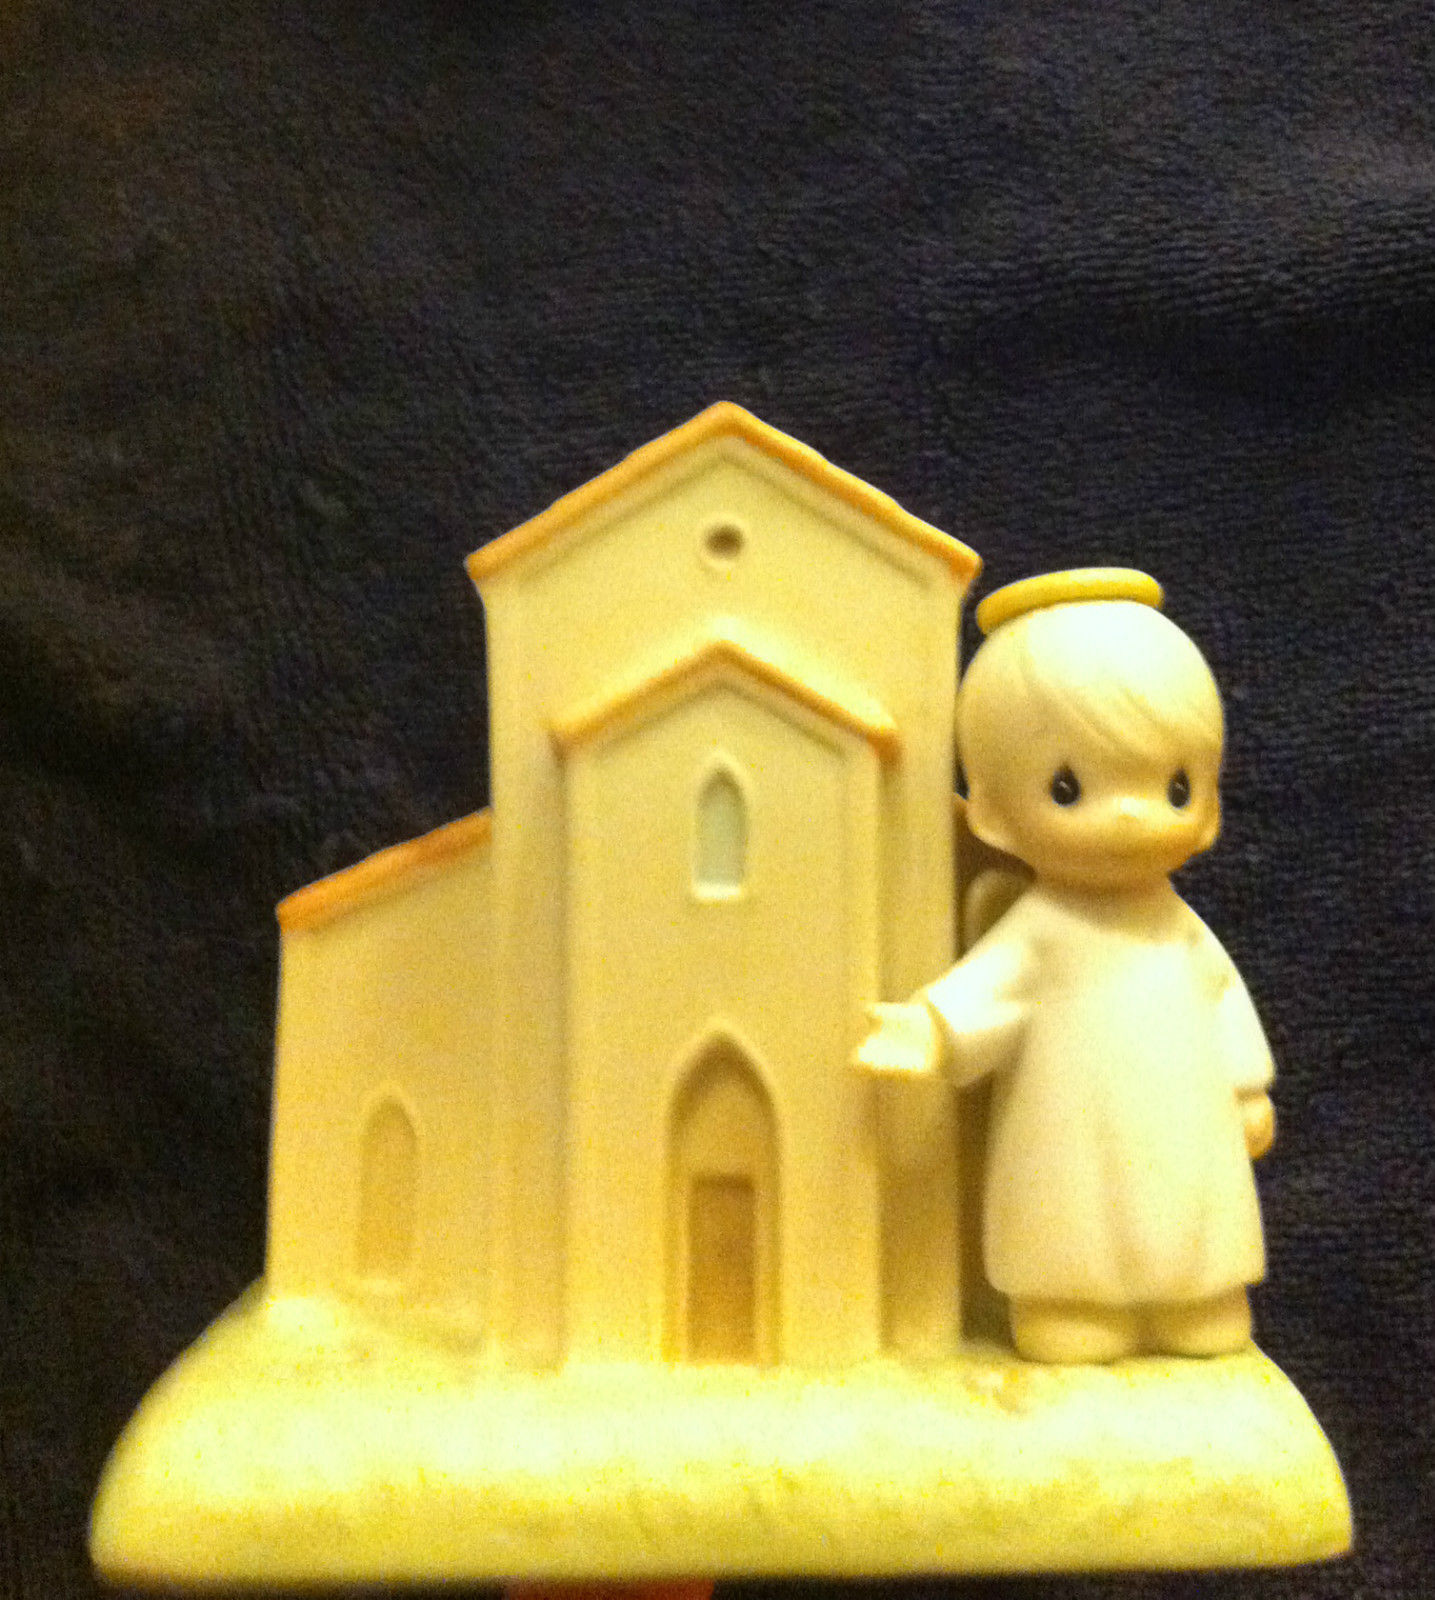 Preciois Moments Ornaments "There's A Christian Welcome Here" 528021 - $14.84